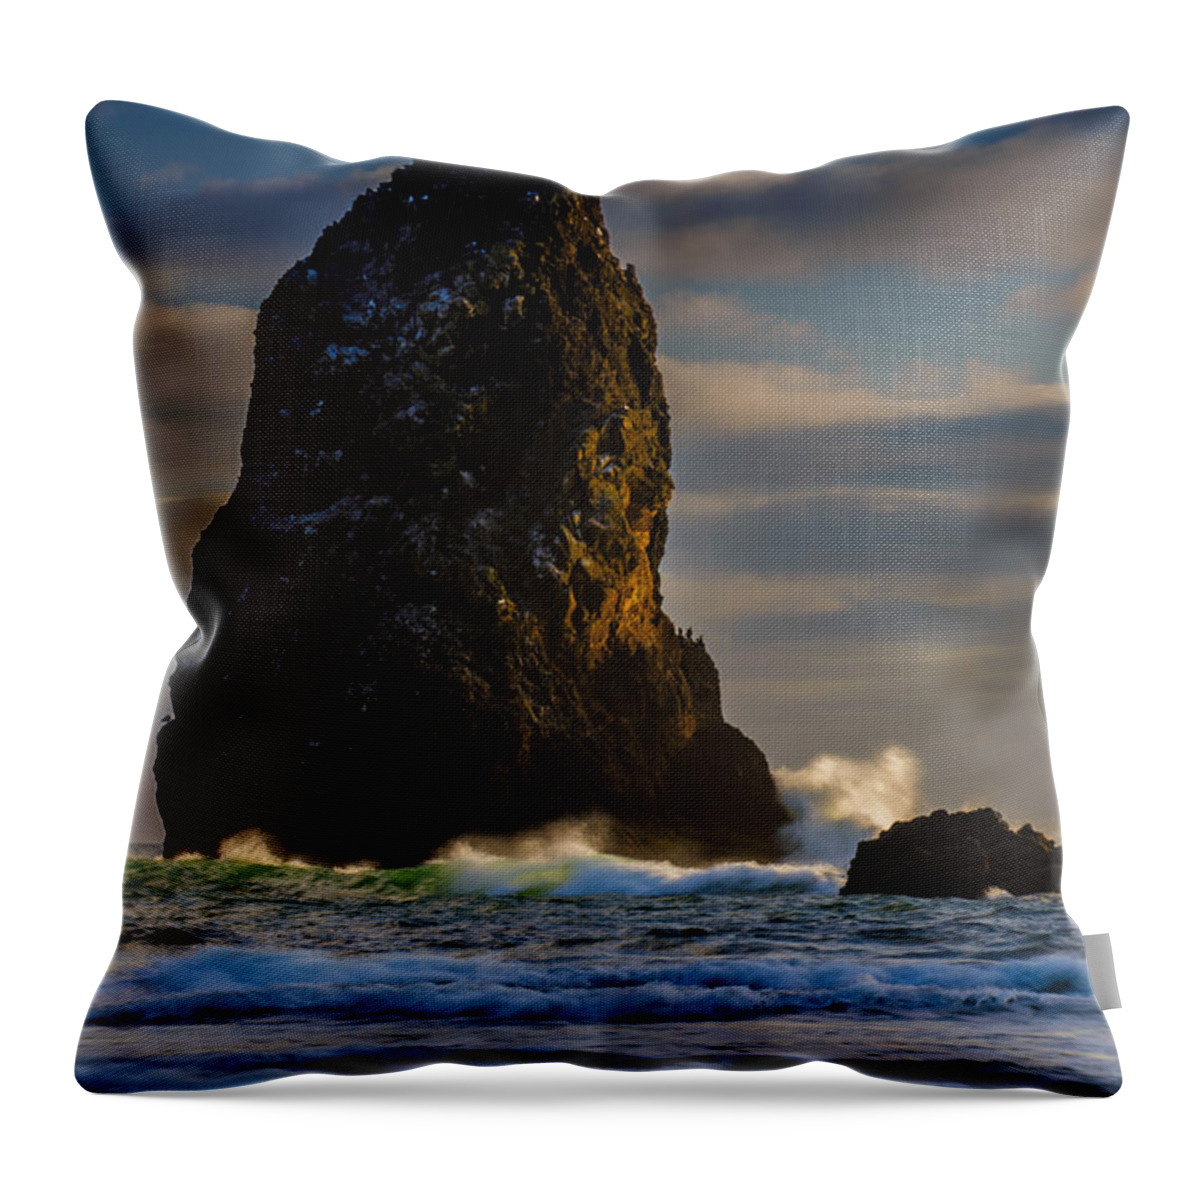 Oregon Throw Pillow featuring the photograph The Needle by Rick Berk